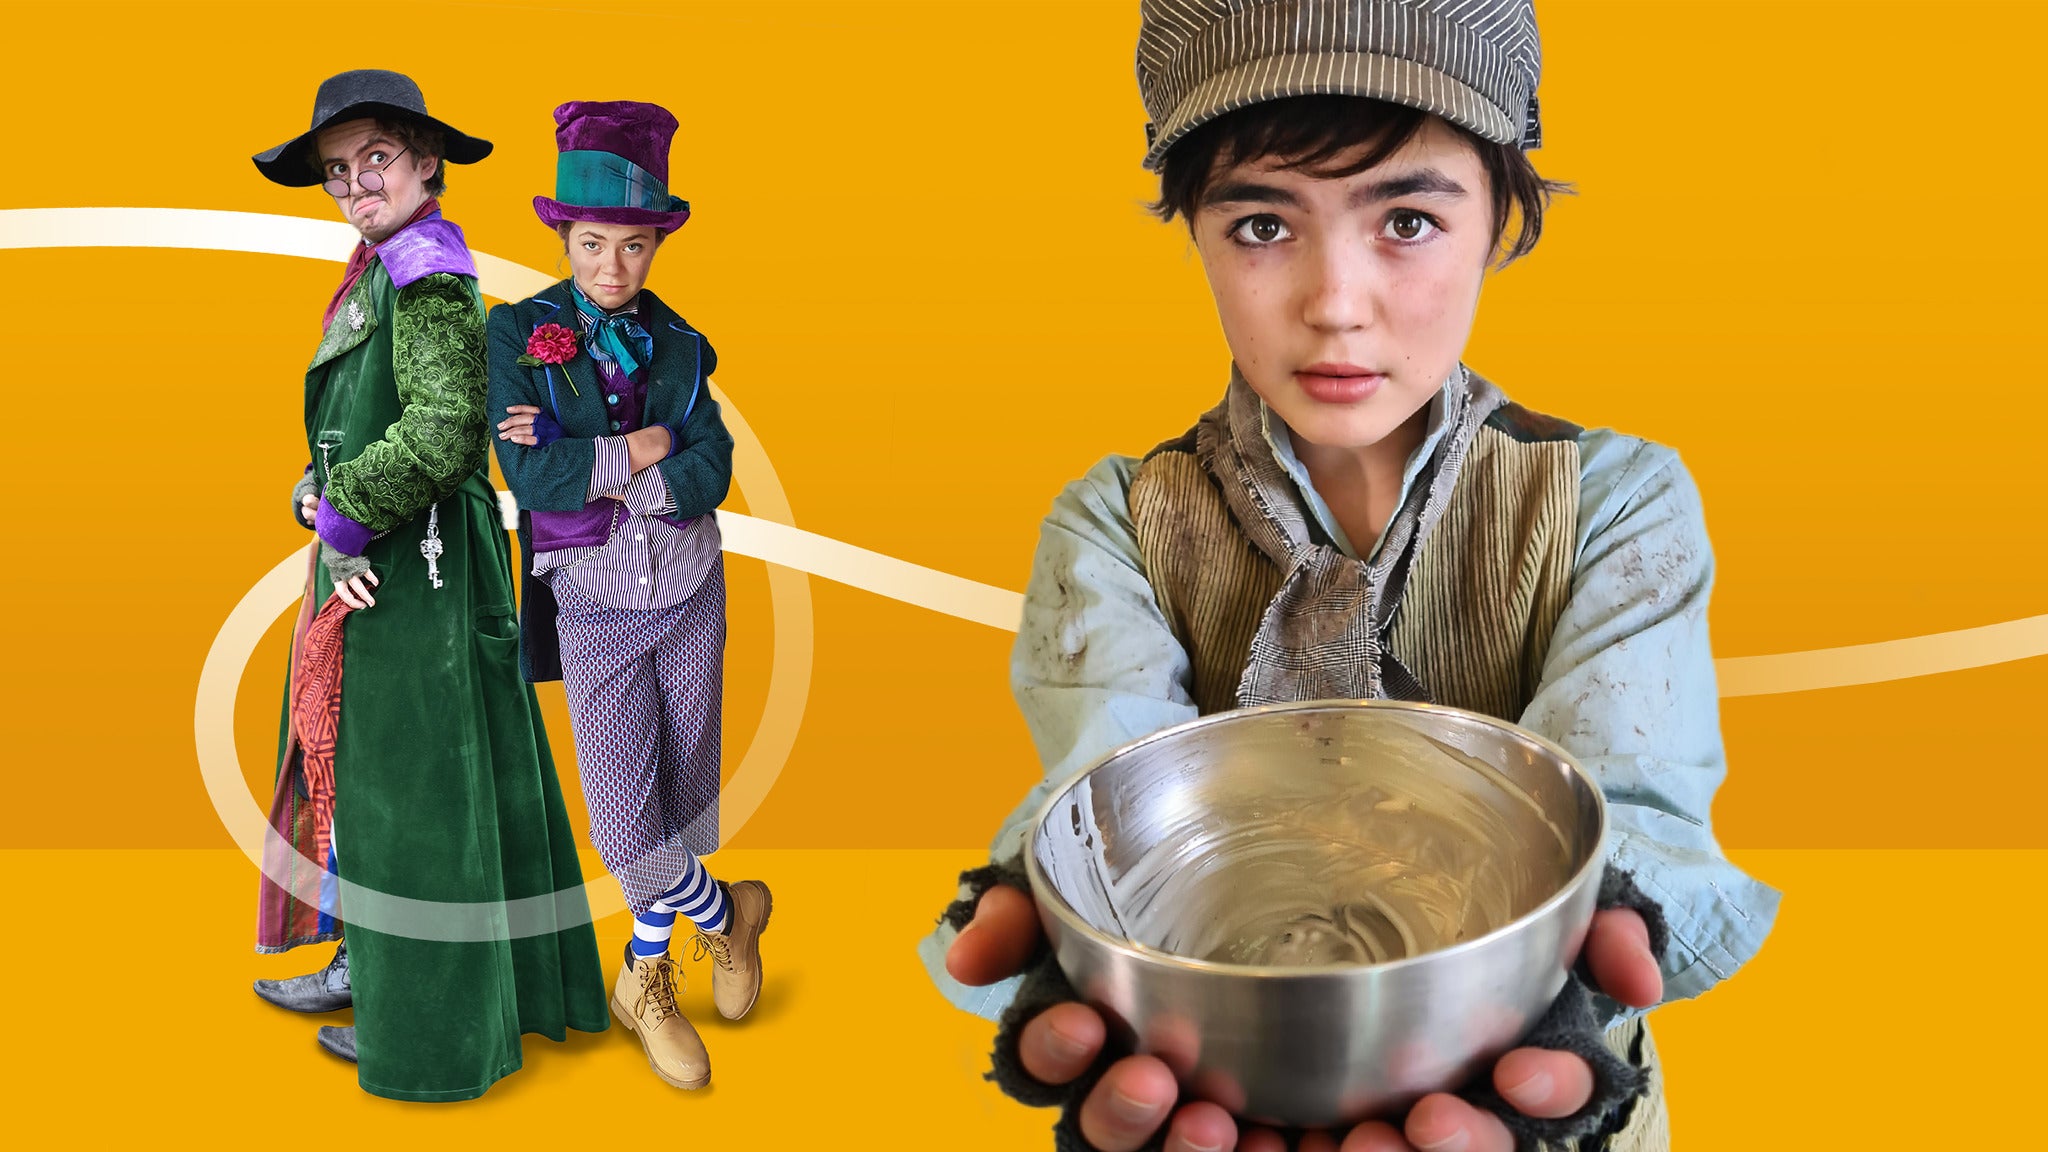 Image used with permission from Ticketmaster | NATIONAL YOUTH THEATRE production of OLIVER! tickets